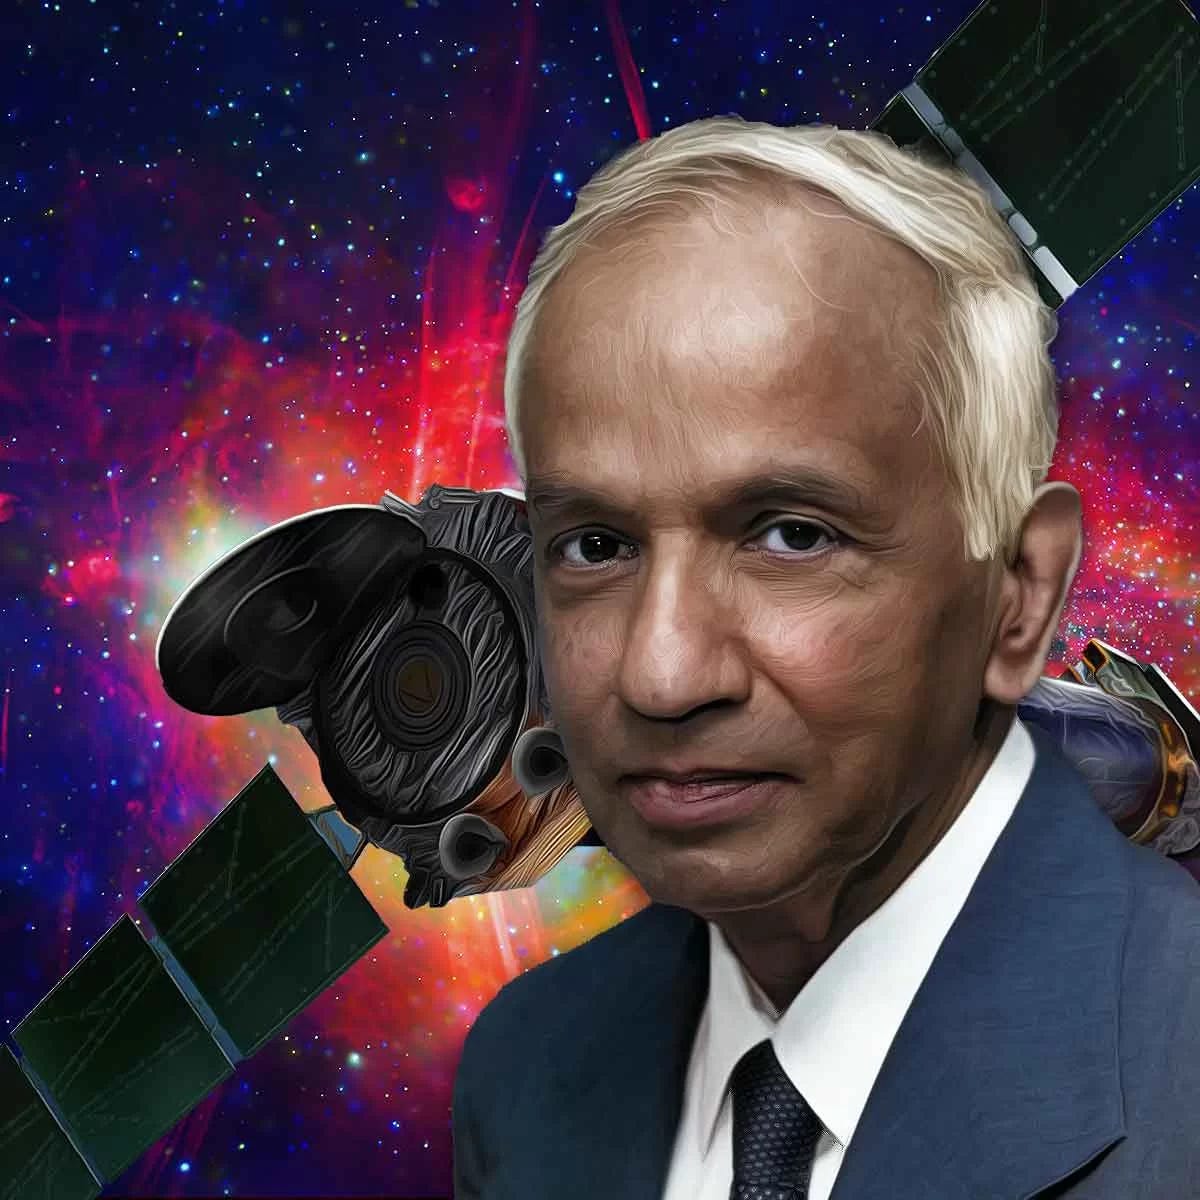 NASA’s advanced X-Ray Observatory and the brilliant Indian scientist it is named after - Chandra X-ray Observatory